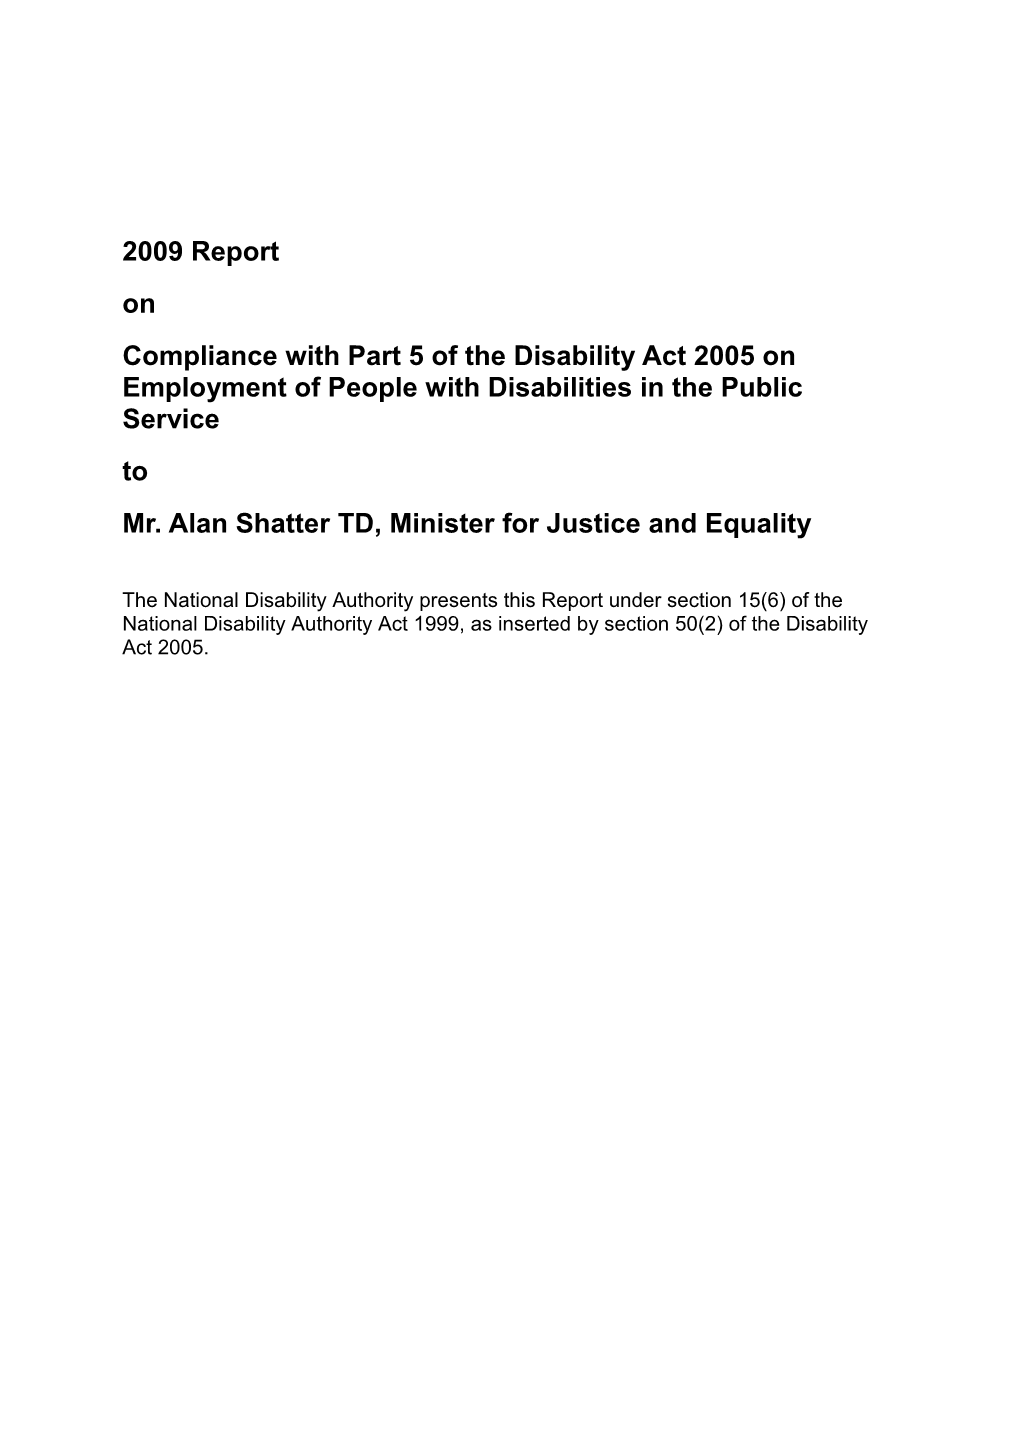 Mr.Alan Shatter TD, Minister for Justice and Equality